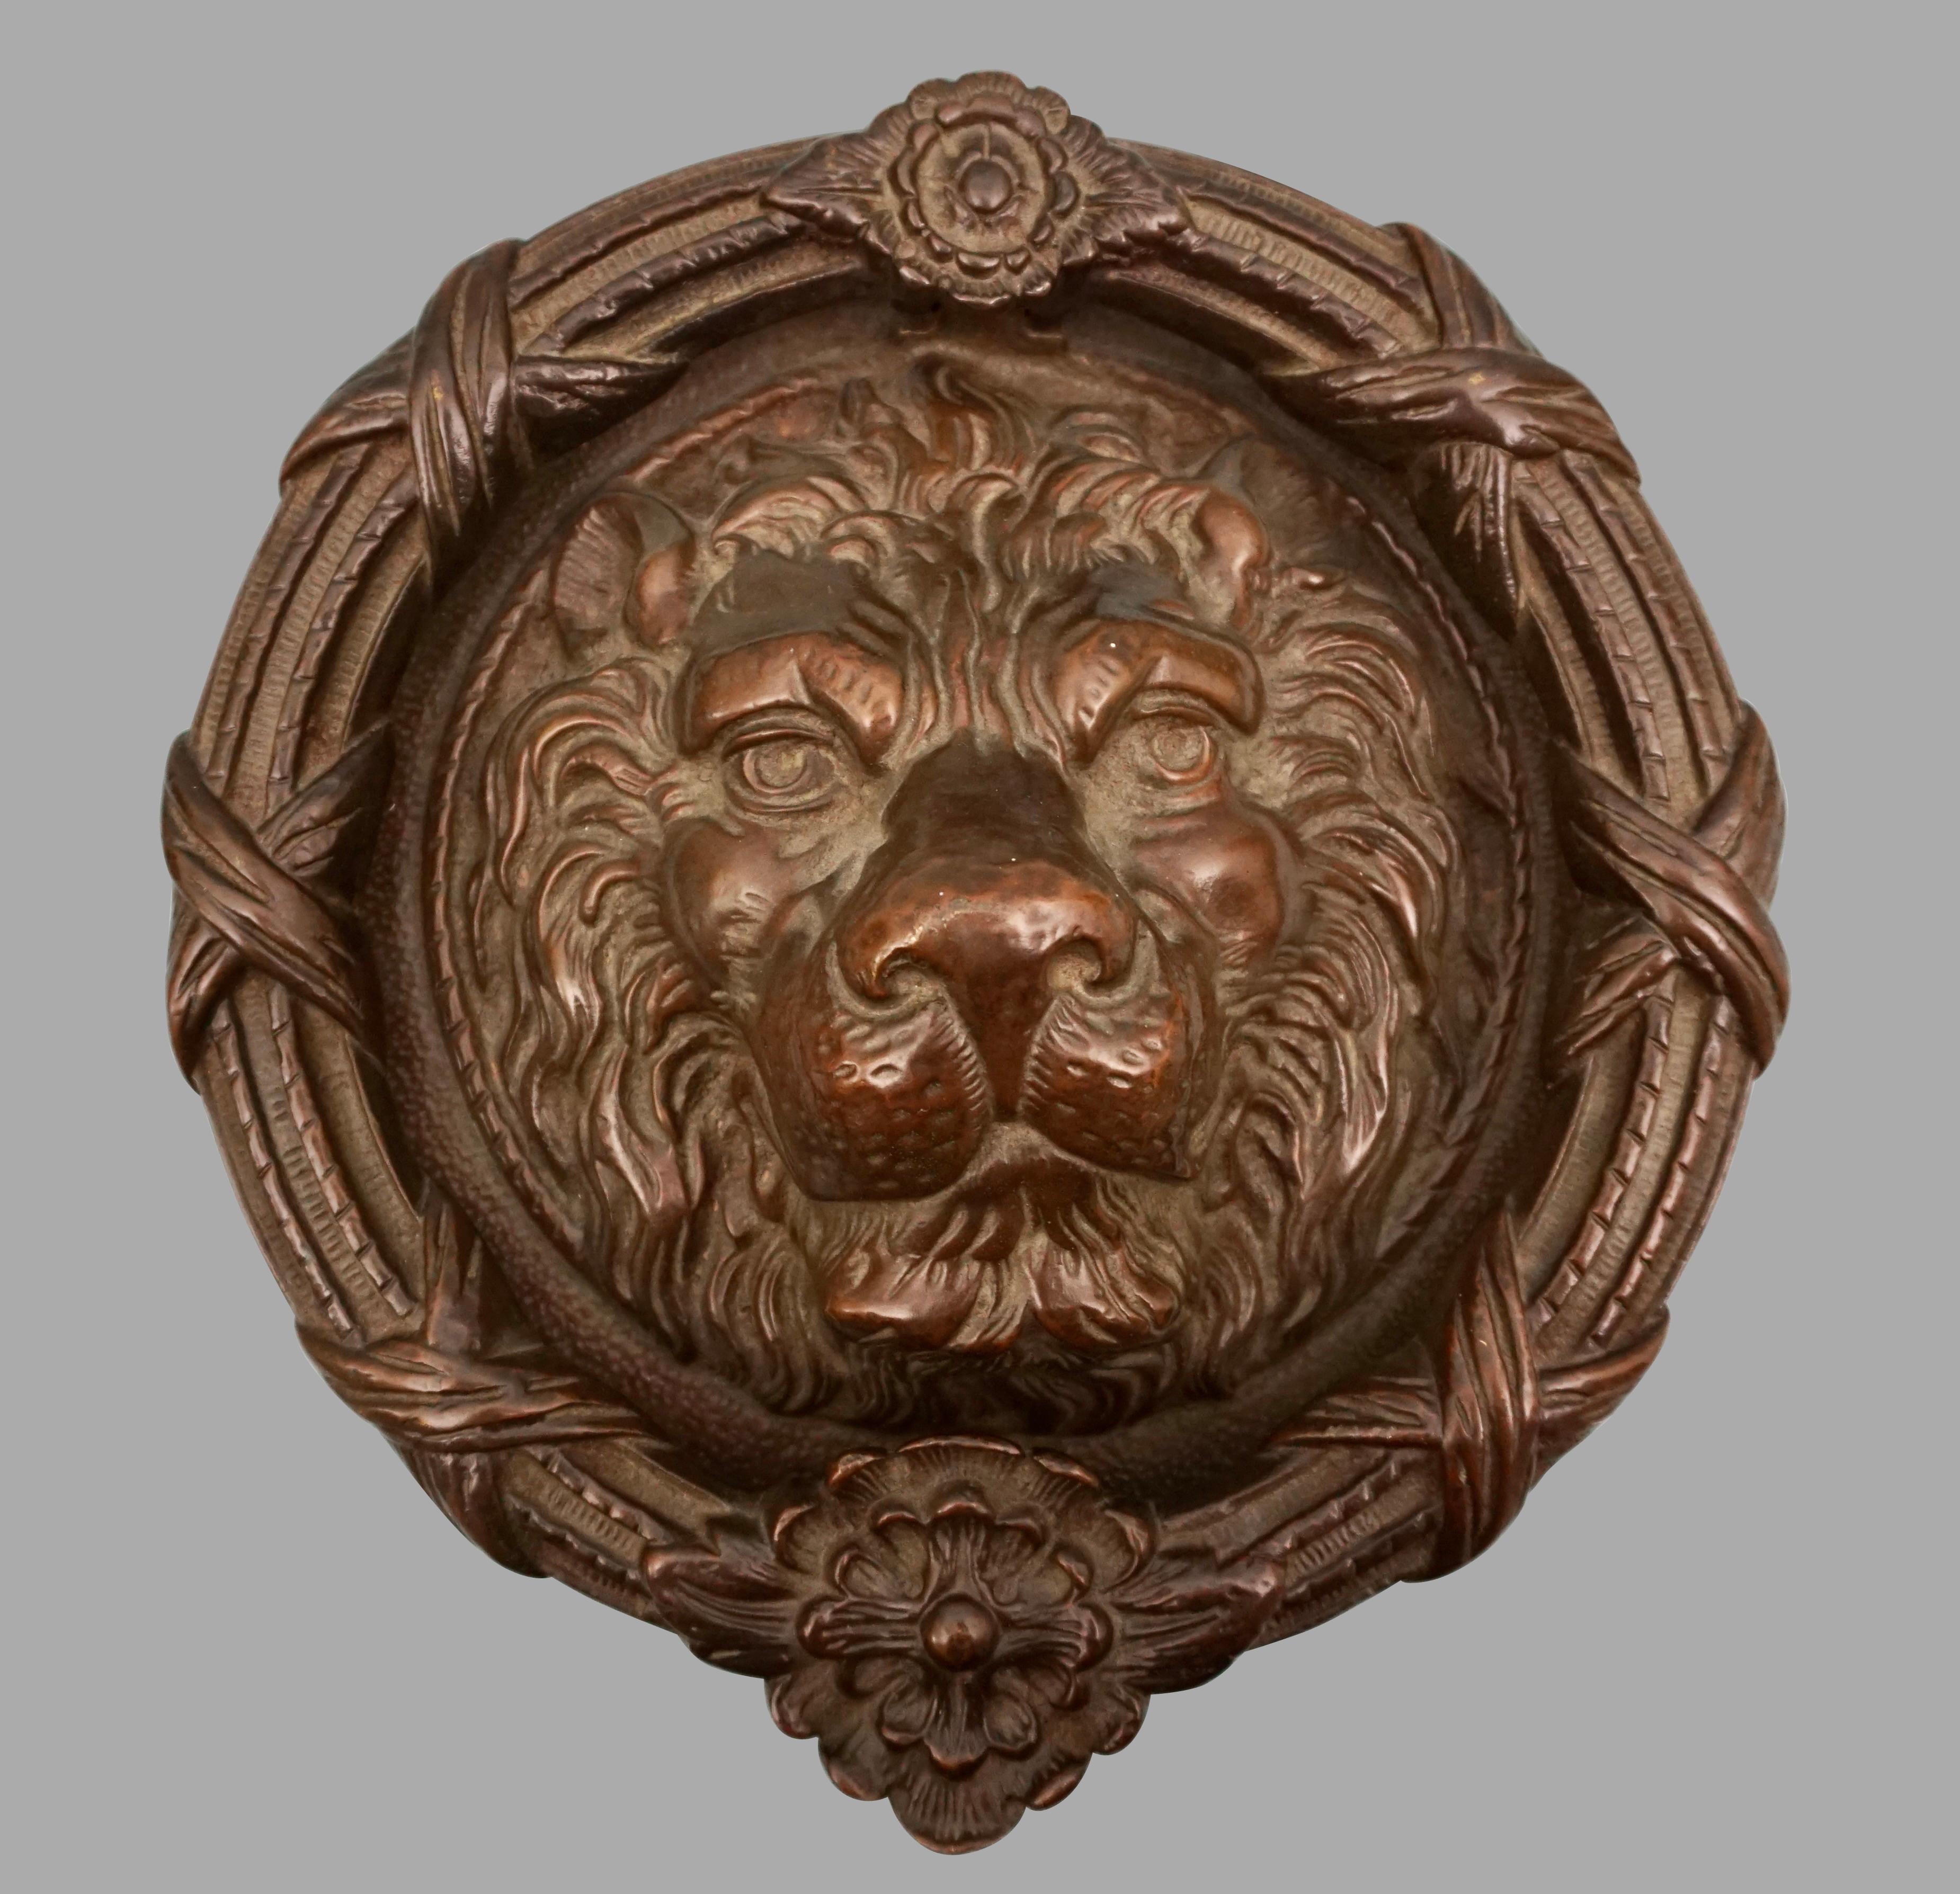 A high quality solid bronze door knocker in the form of a lion's face. This handsome and large piece is in the neoclassical taste and is impressive both in scale and quality of execution. Probably English in origin, this knocker certainly makes a